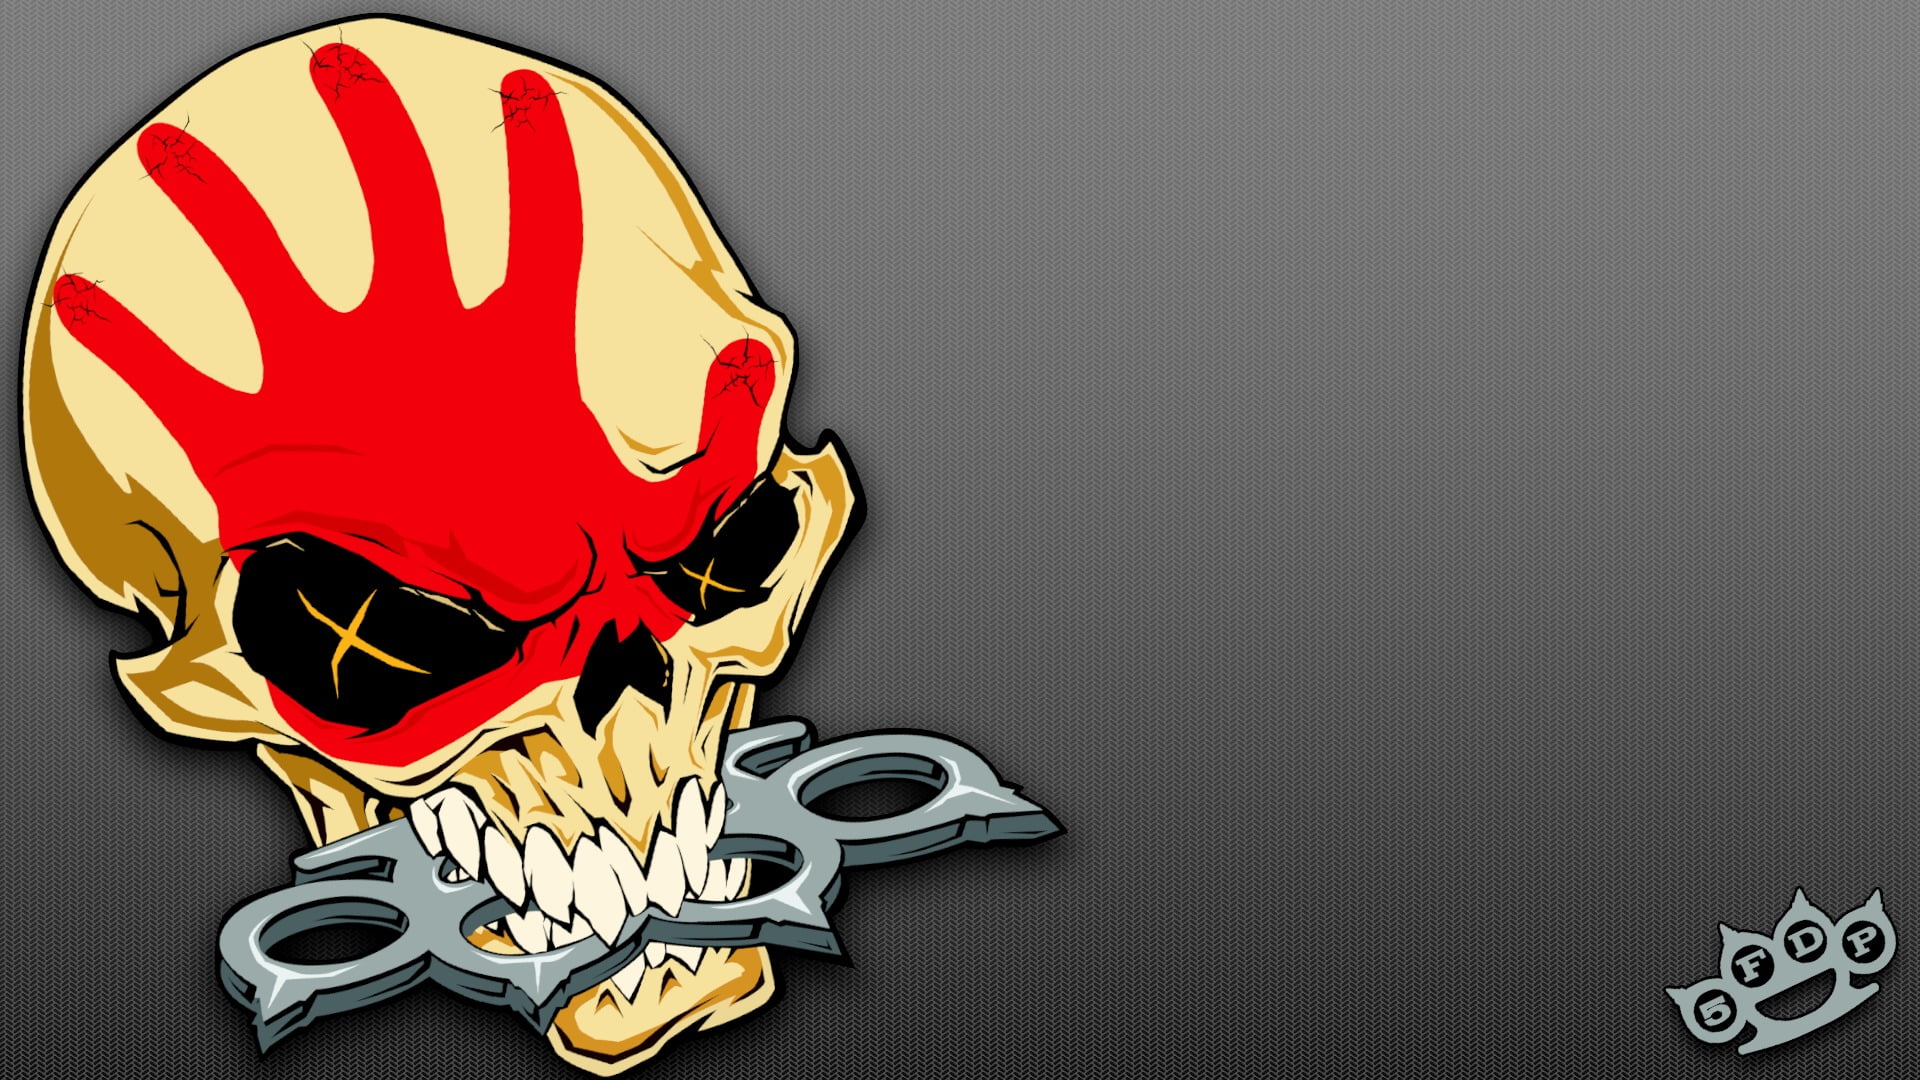 red and yellow biting gray knuckle wallpaper, 5 Finger Death Punch